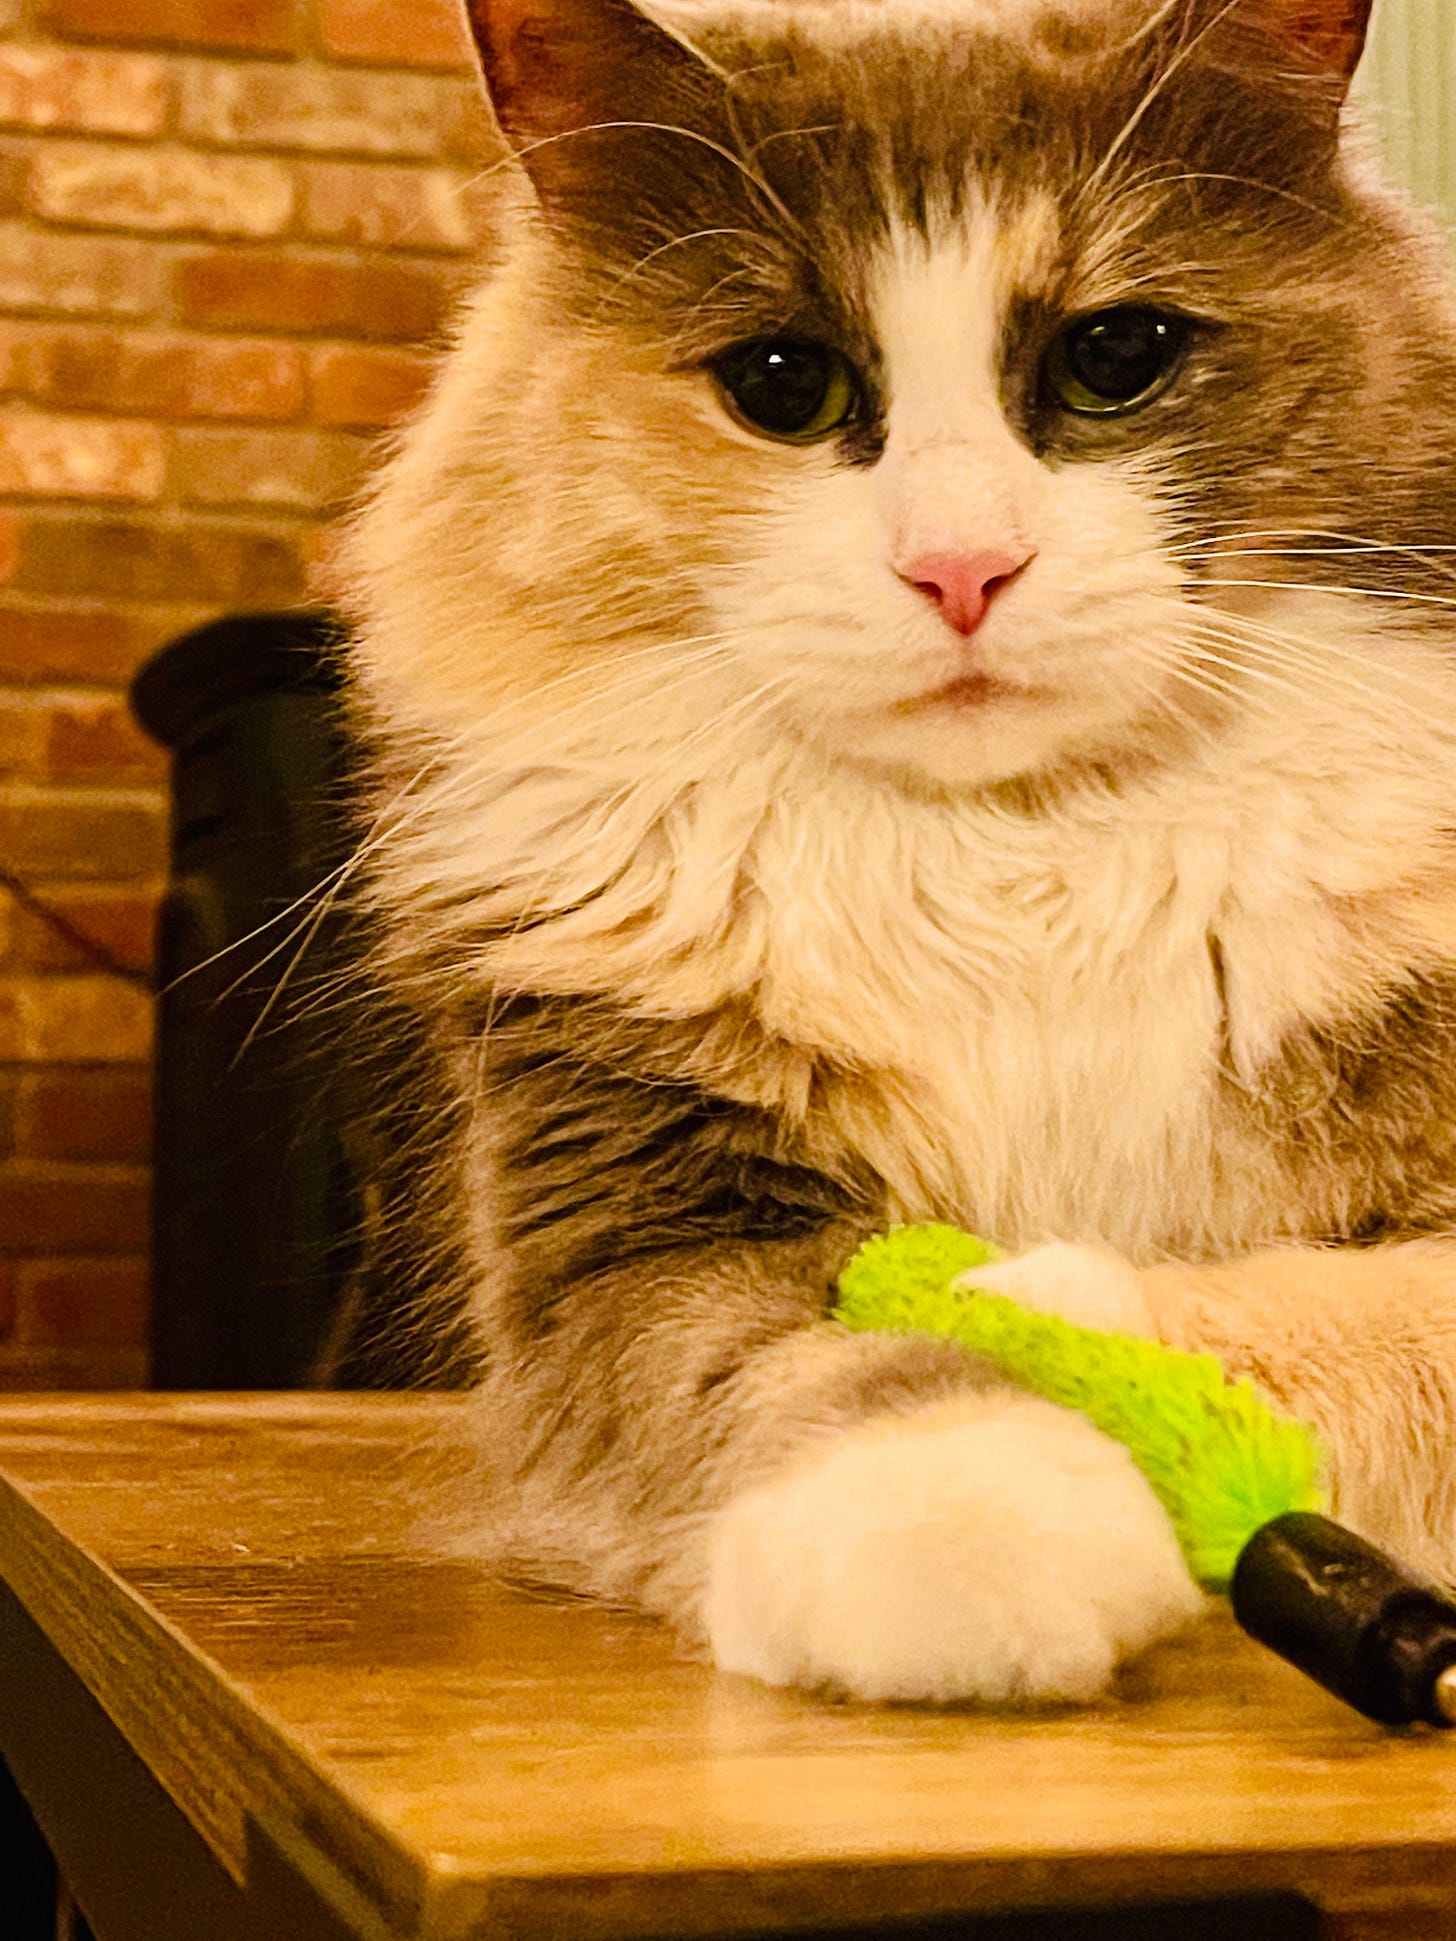 cat on a coffee table holding a toy